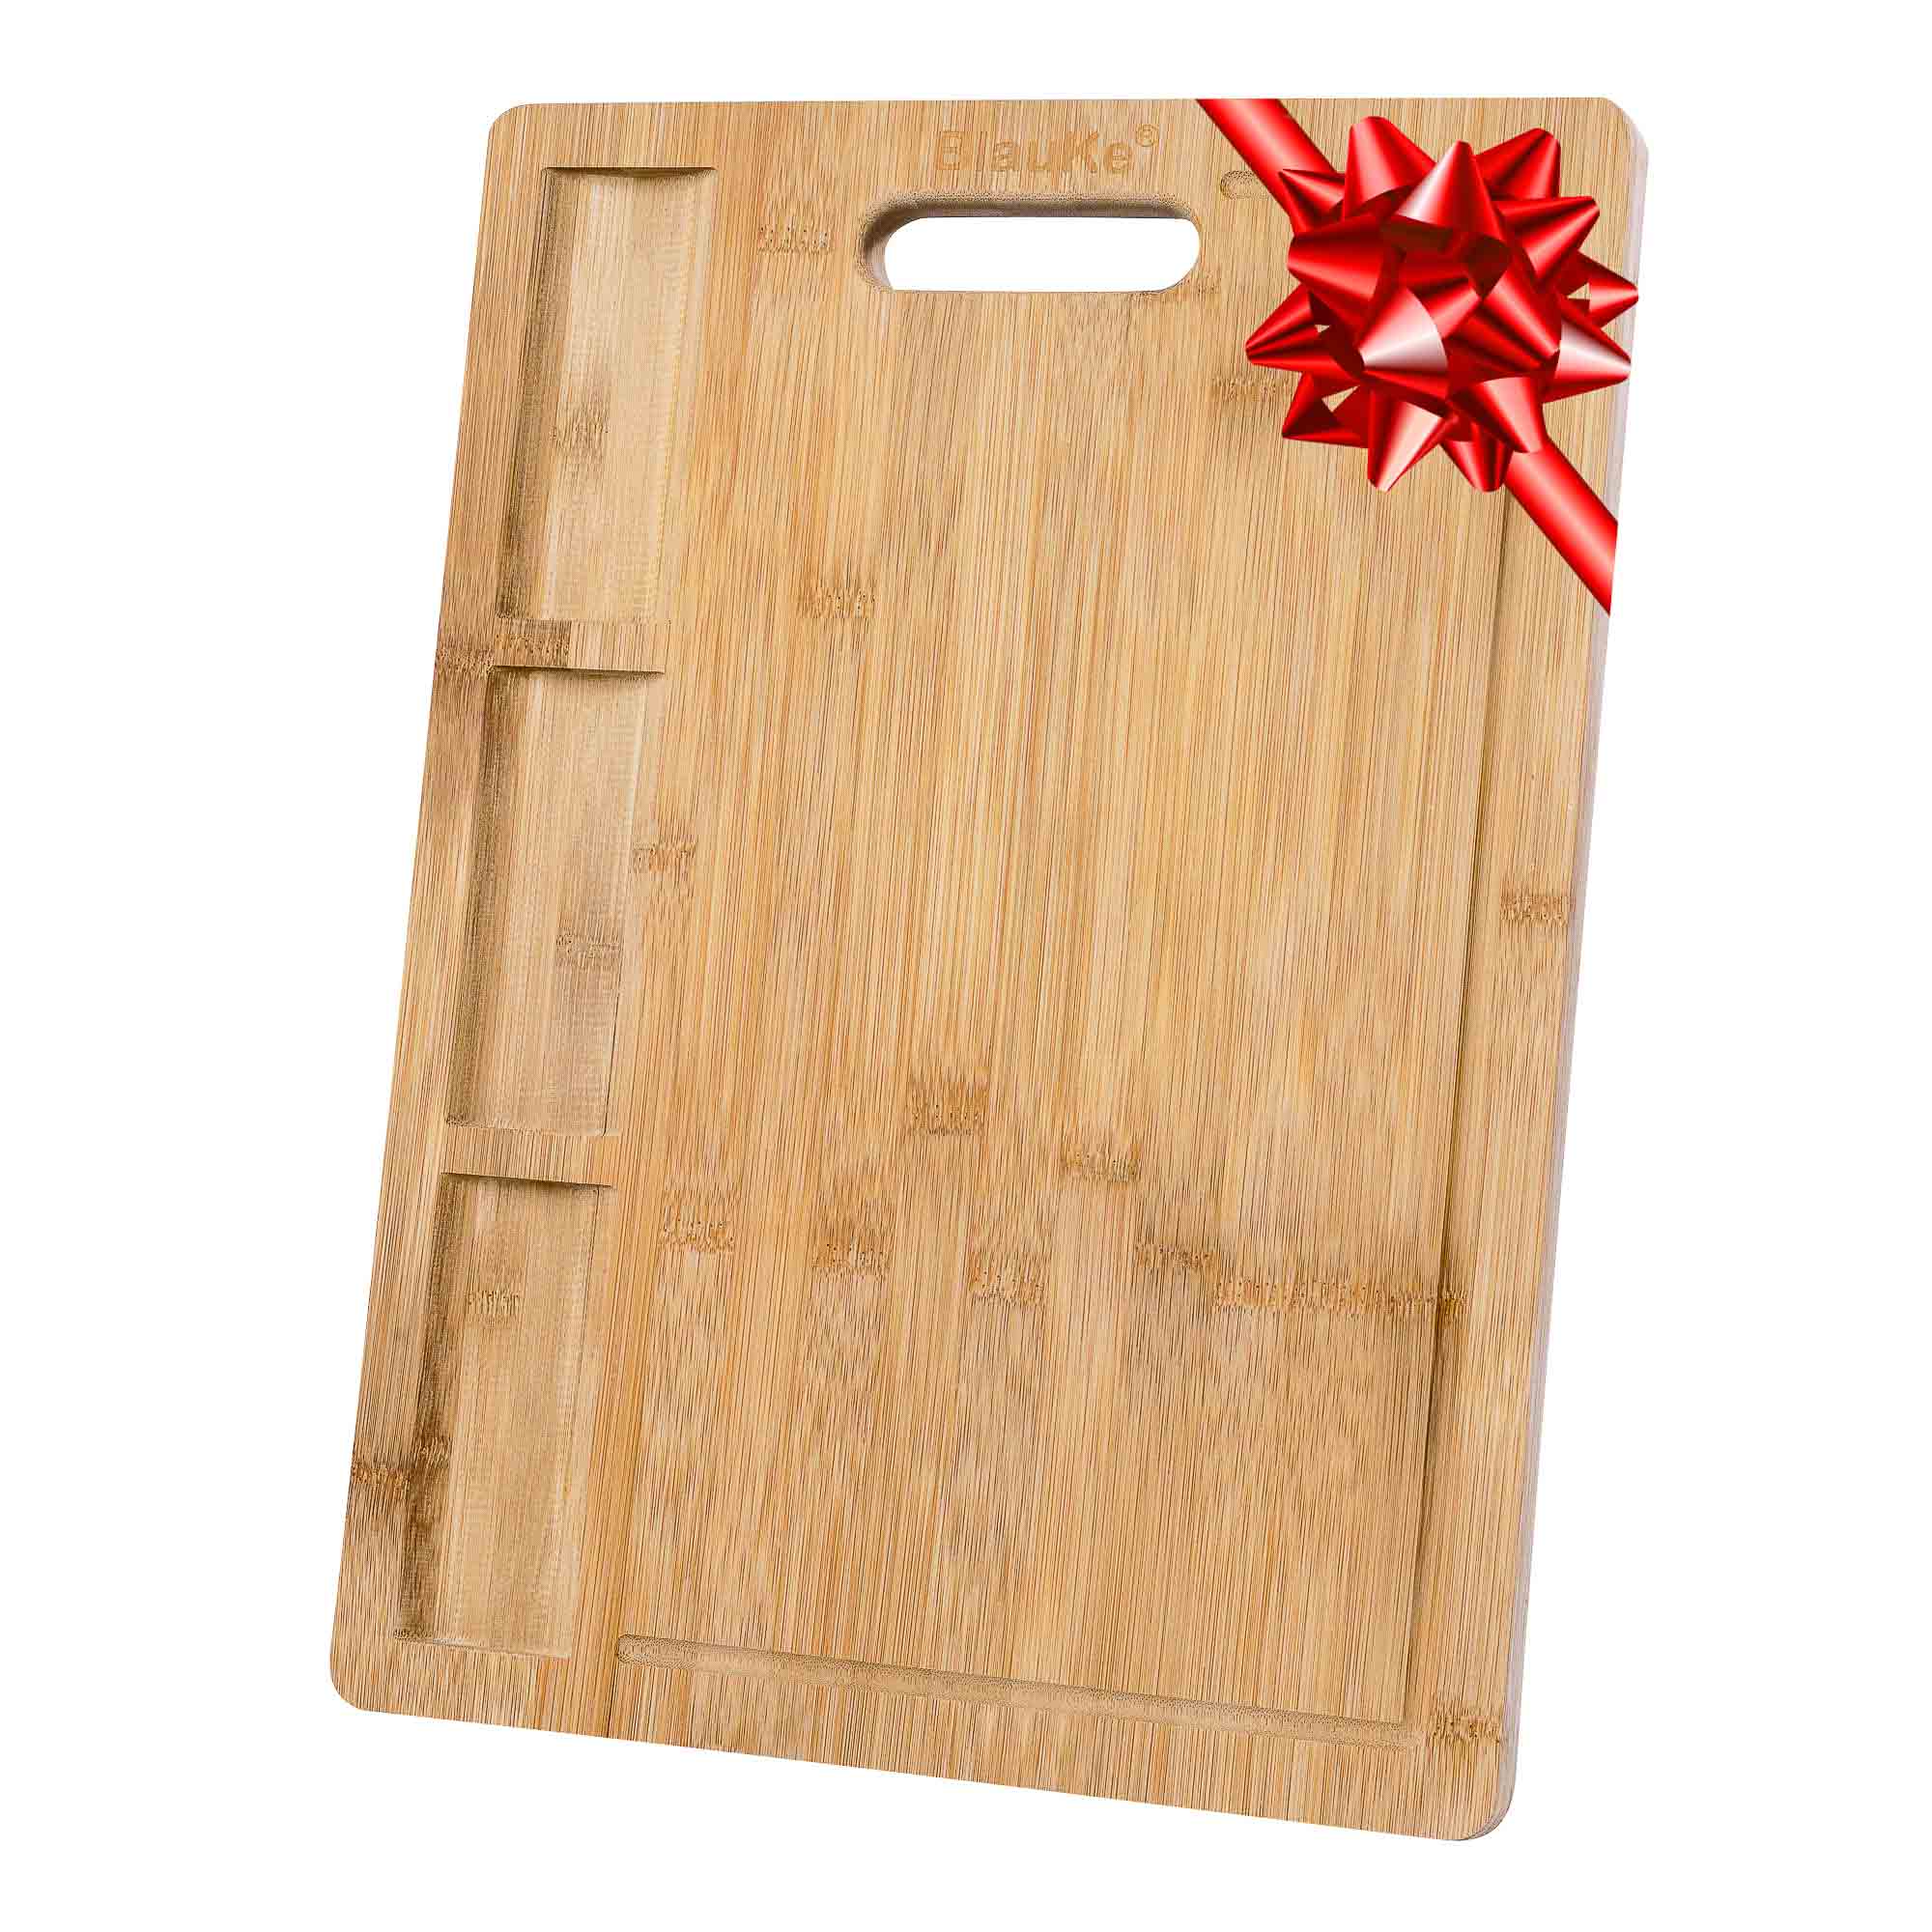 http://blauke.com/cdn/shop/products/WoodenCuttingBoardsforKitchen_ExtraLargeBambooCuttingBoardwithContainers_LargeWoodCuttingBoard-1.jpg?v=1615826512